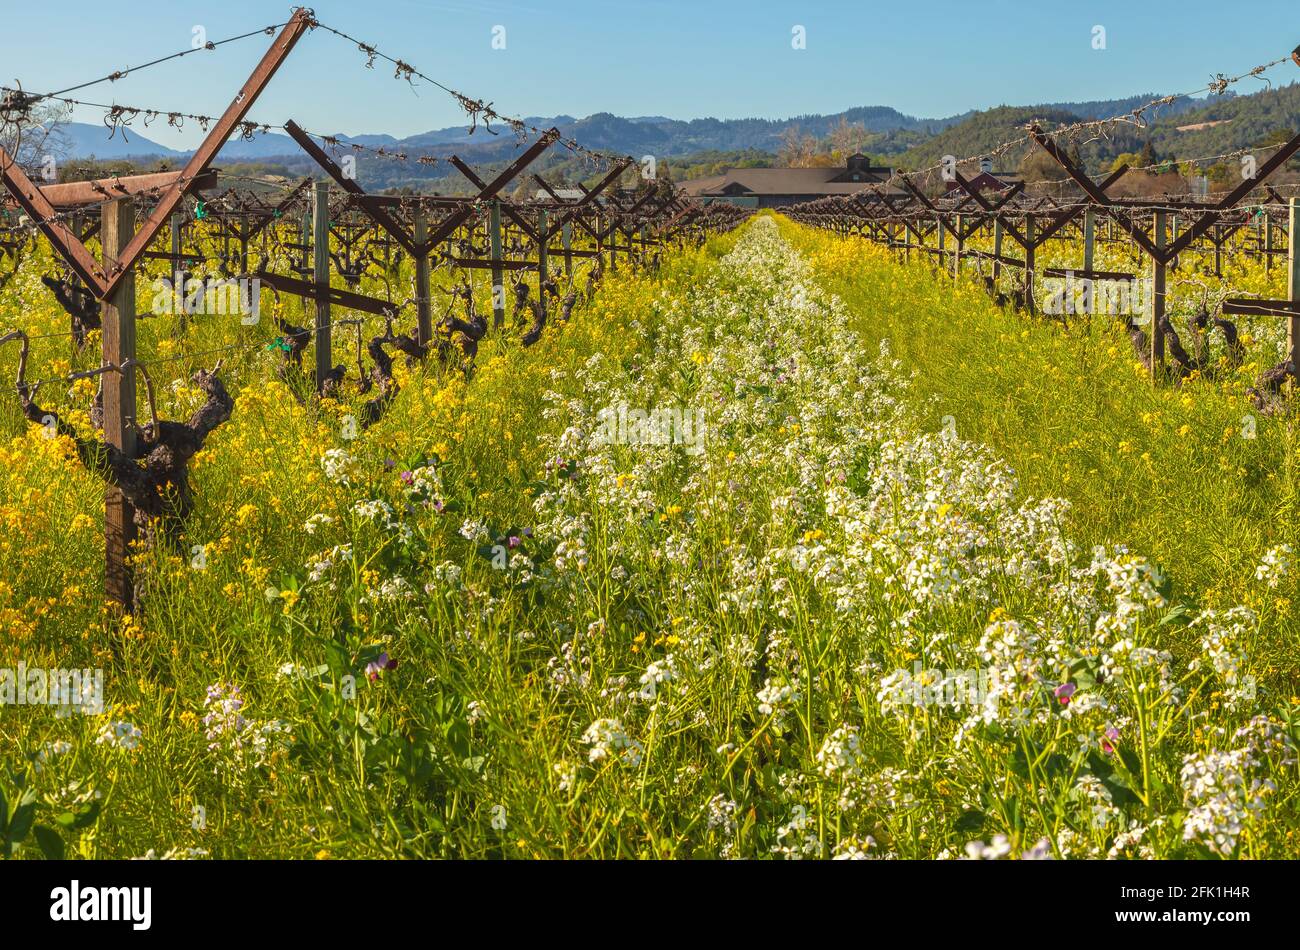 Blooming wildflowers and the grapevines in early spring, Napa Valley, California, USA. Stock Photo